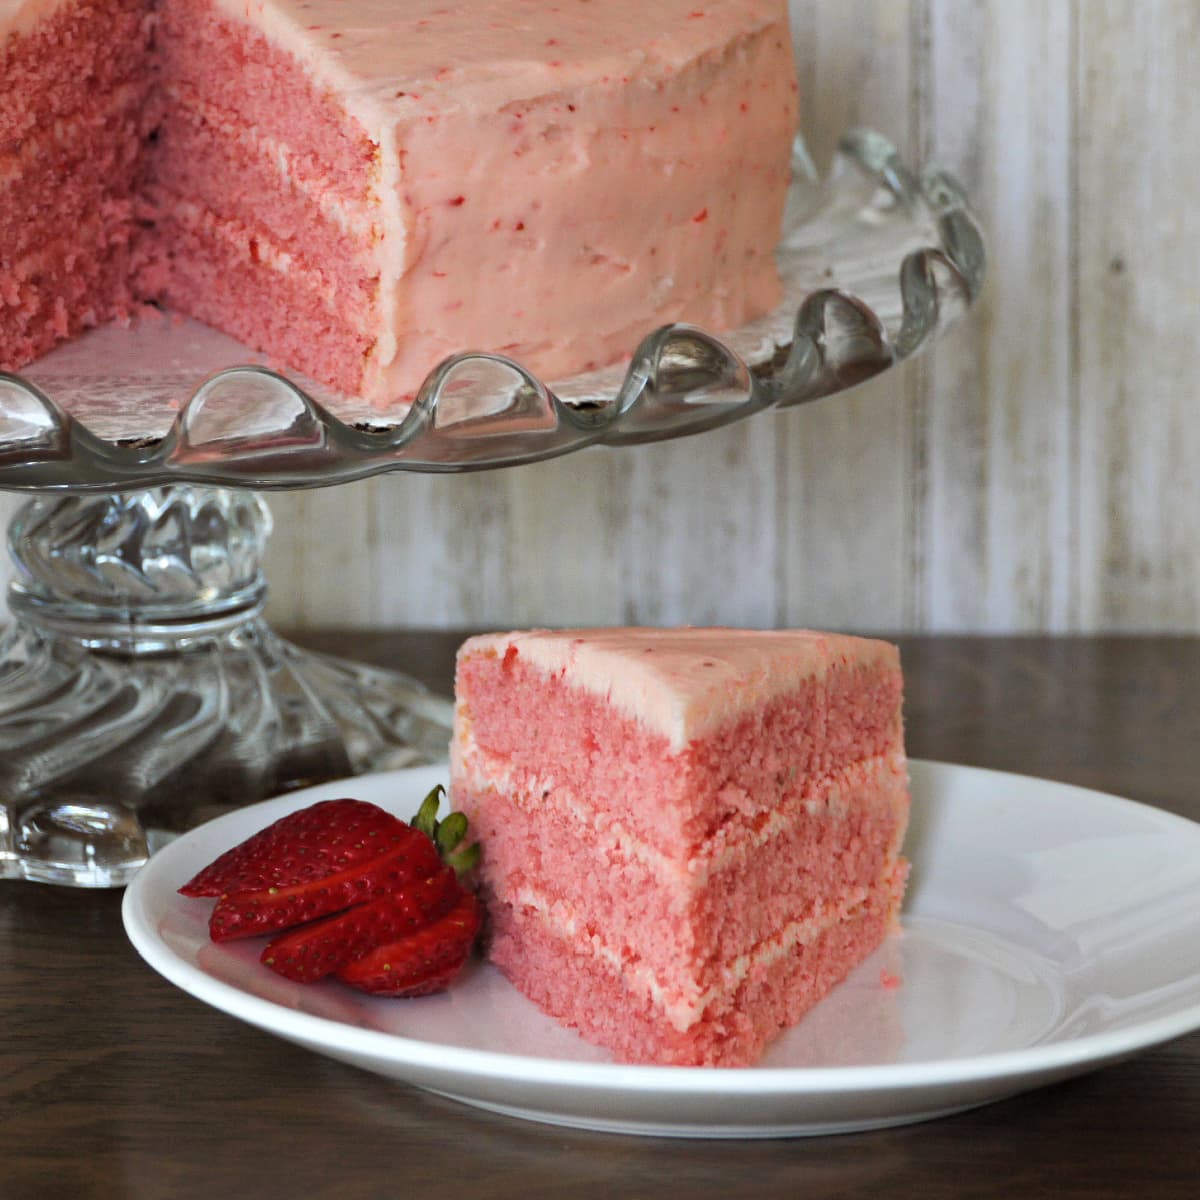 Slice of 3-layer strawberry cake on plate. Remaining cake on glass cake stand in left rear. 